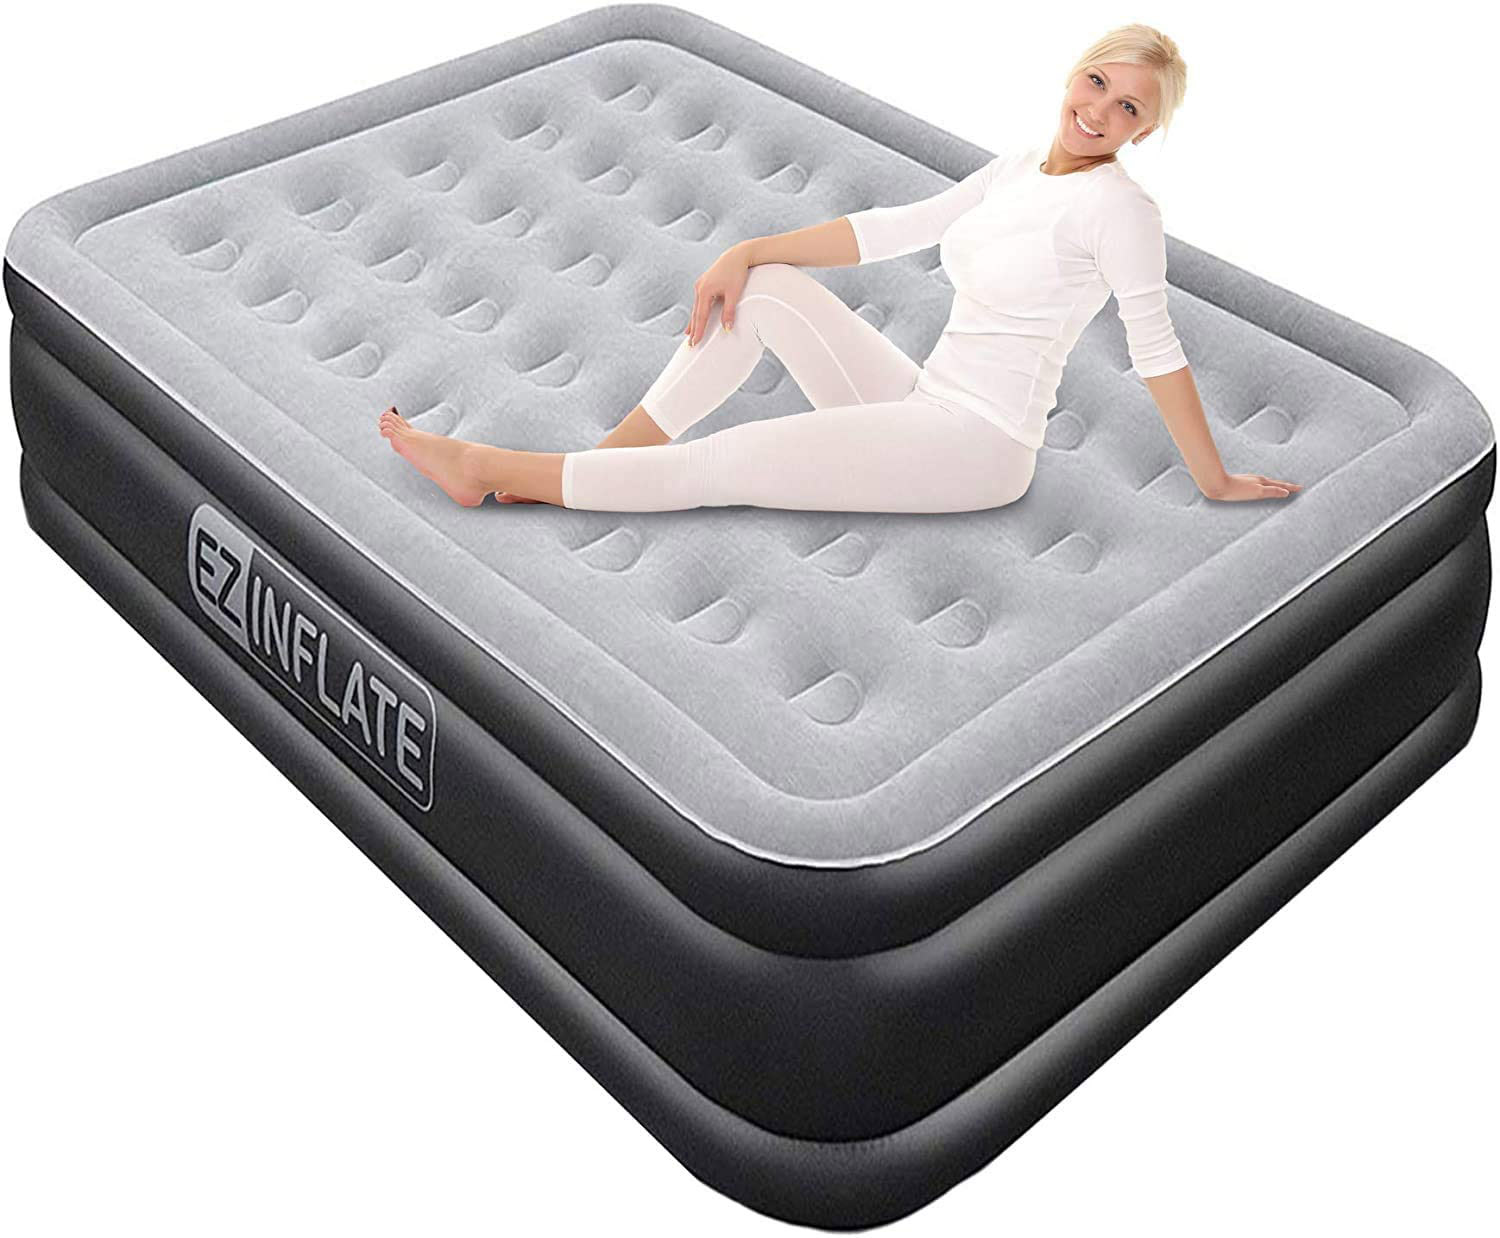 are air mattresses cold to sleep on